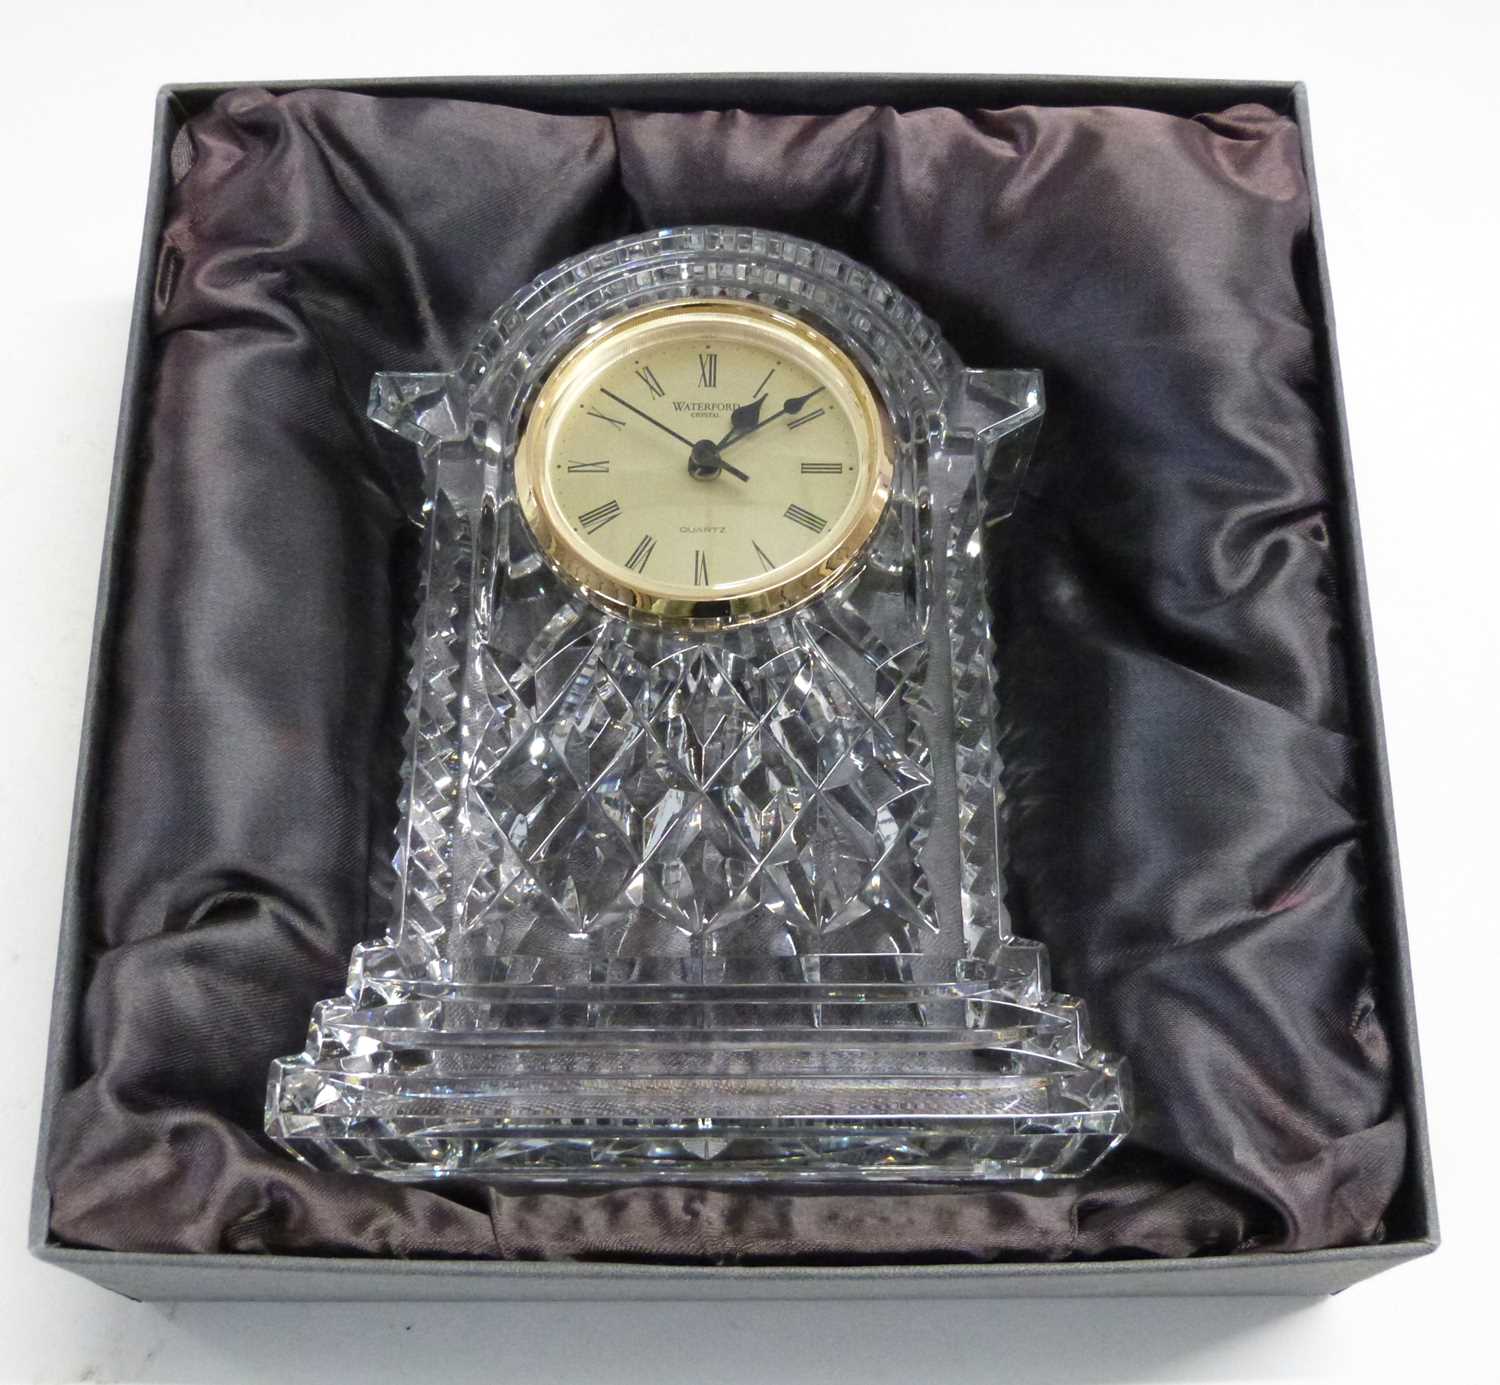 A Waterford Crystal clock in original box with instructions